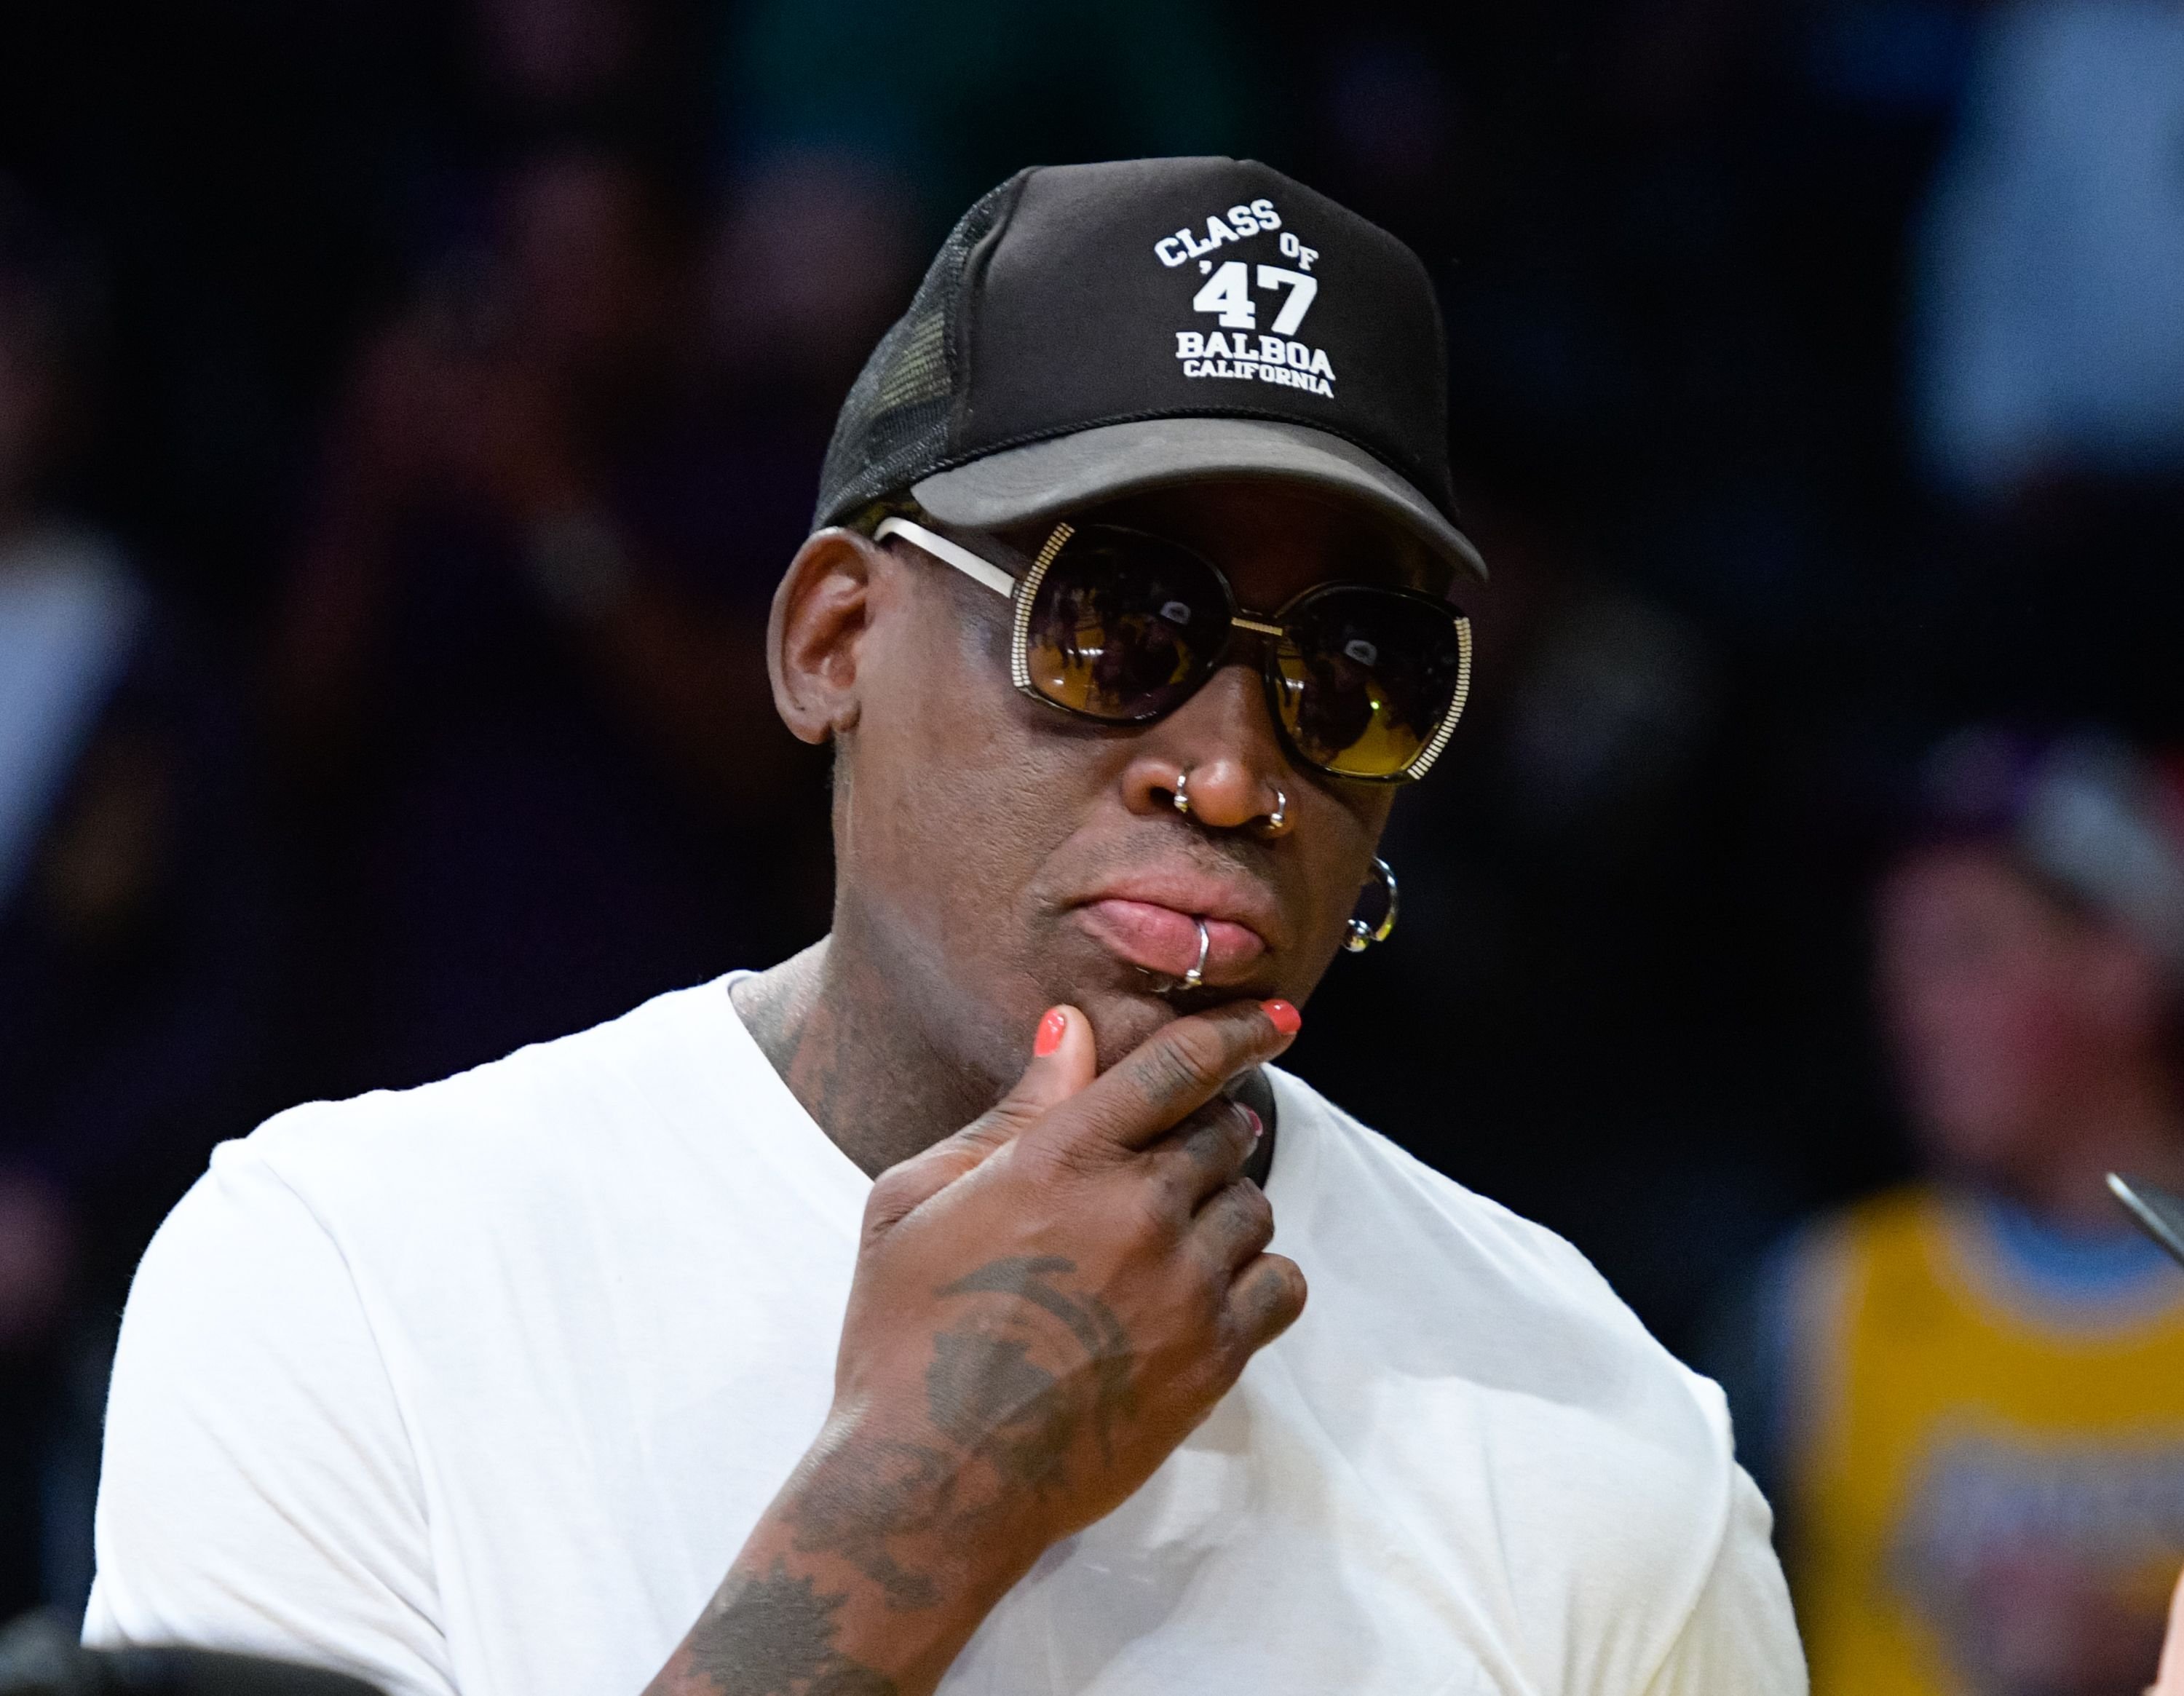 Dennis Rodman during a basketball game between the Golden State Warriors and the Los Angeles Lakers at Staples Center on November 25, 2016 in Los Angeles, California. | Source: Getty Images